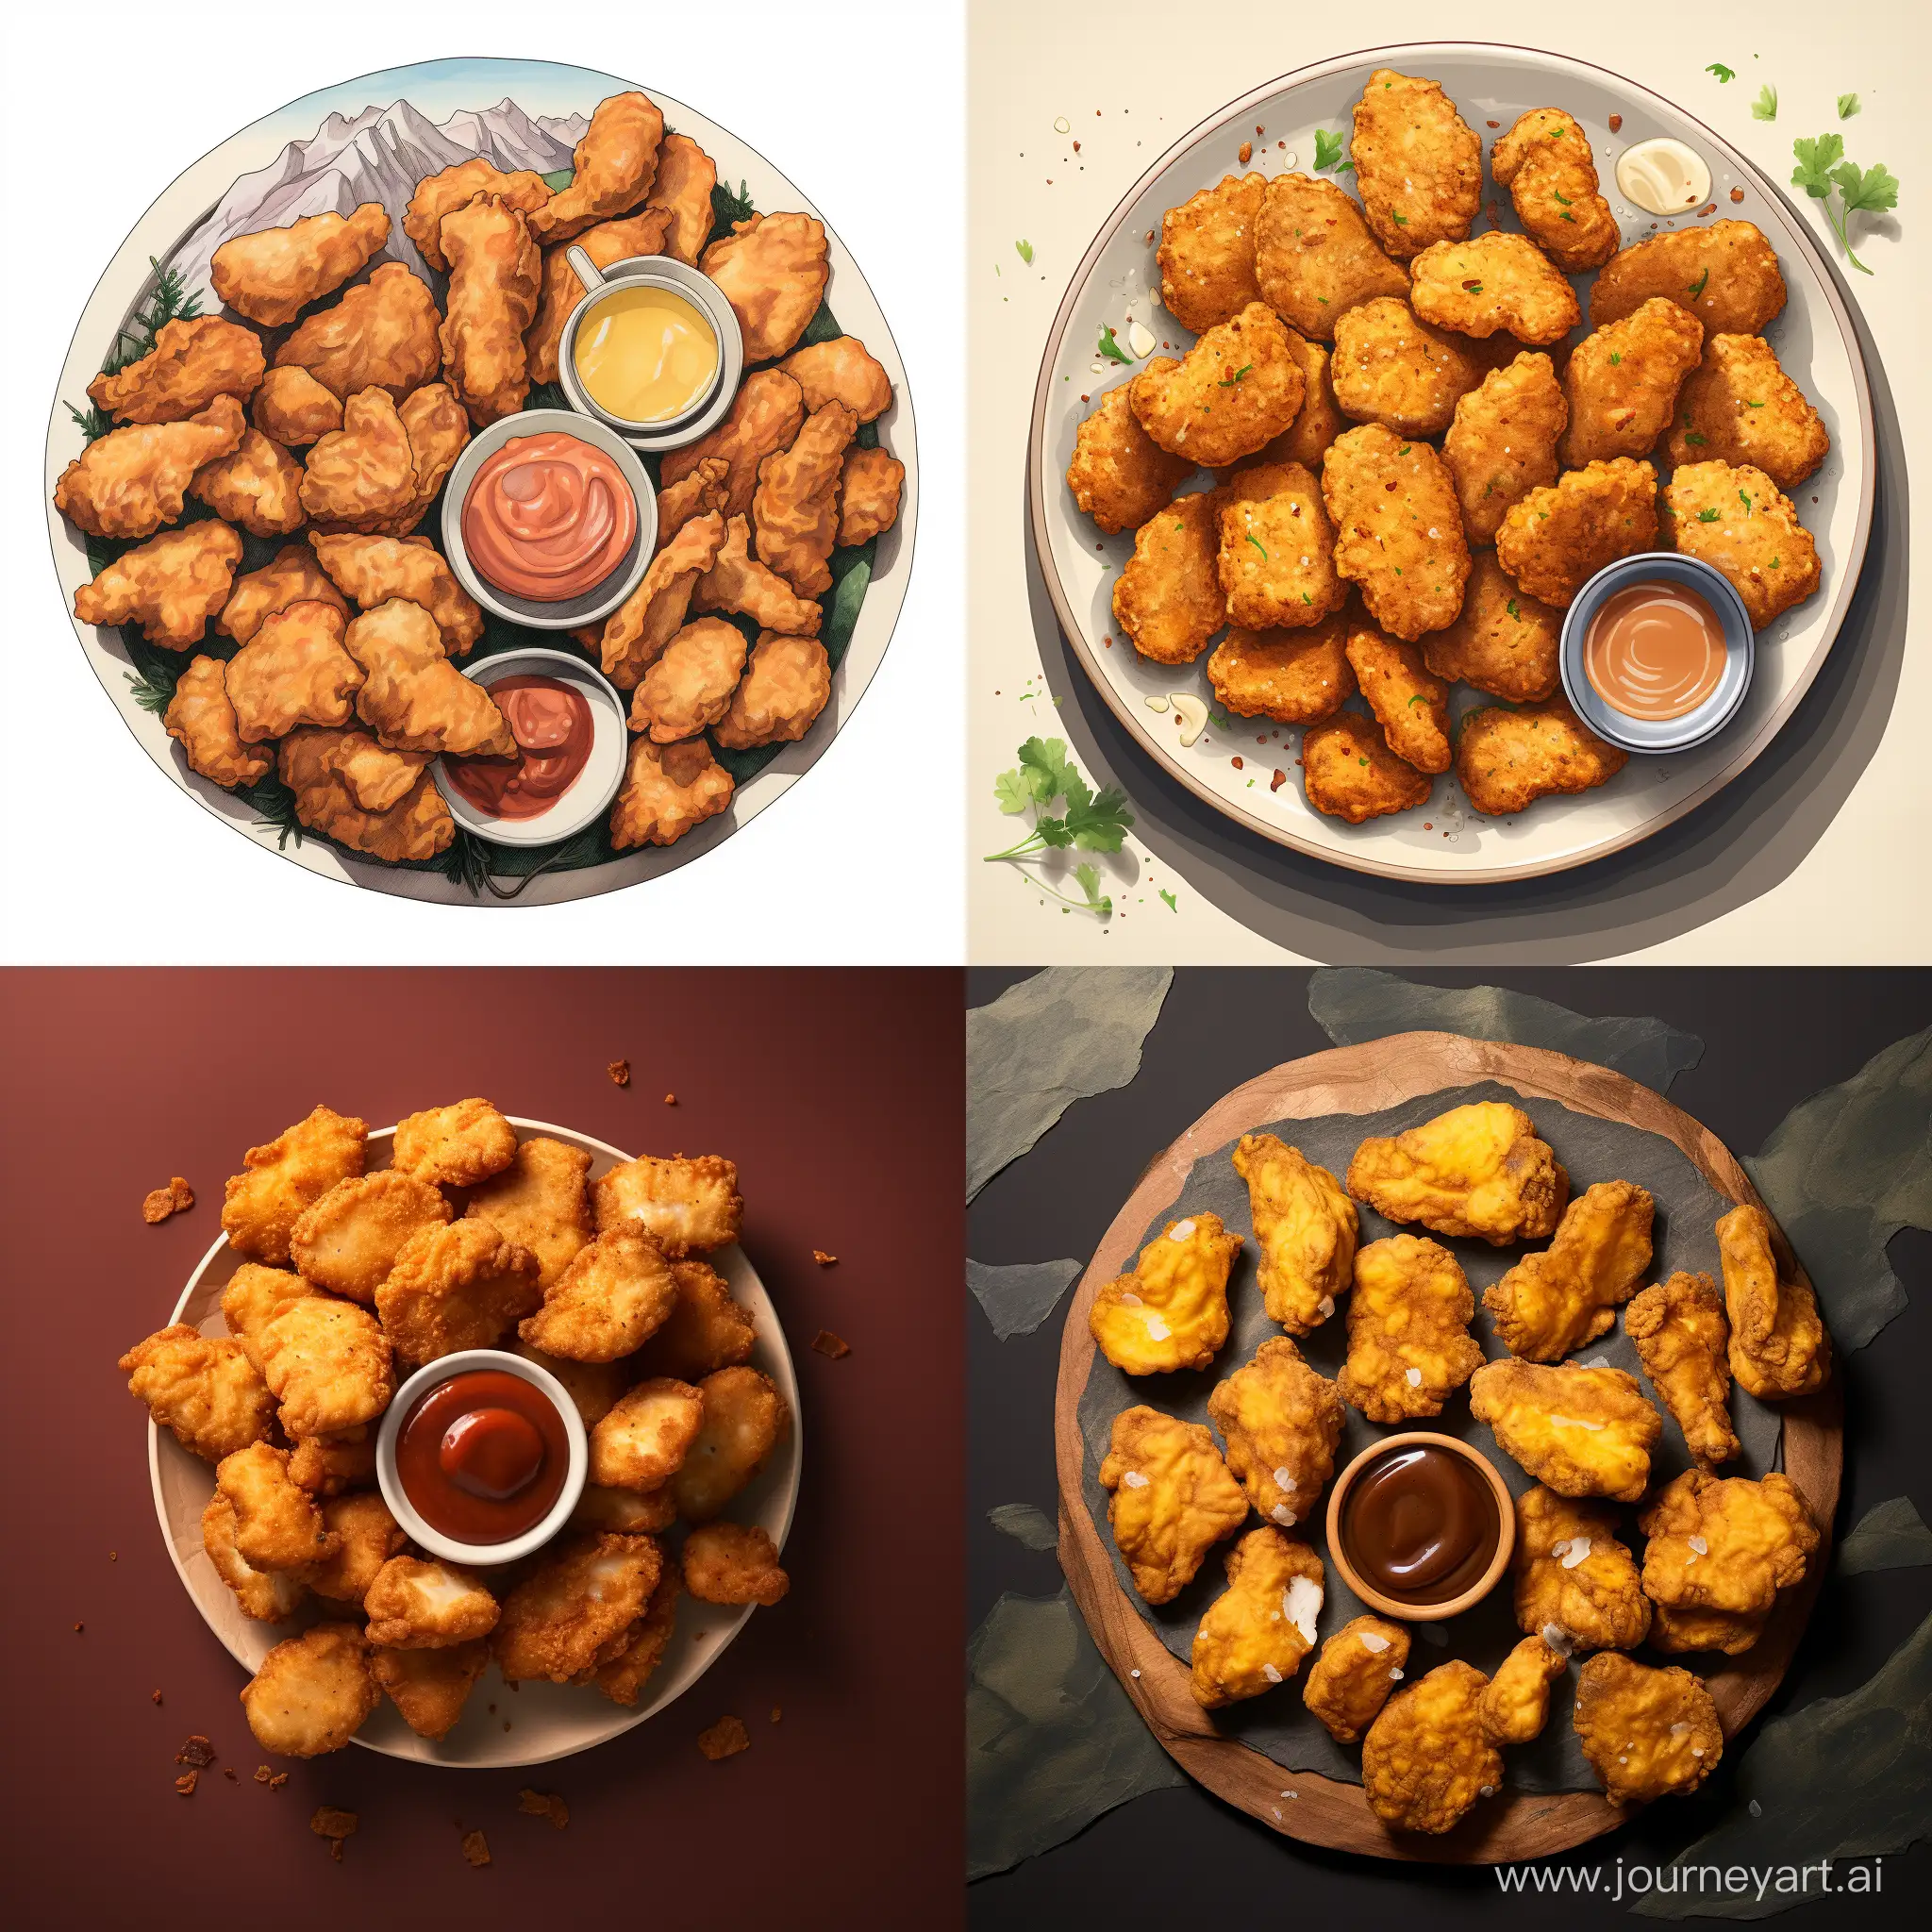 half of the nuggets top view